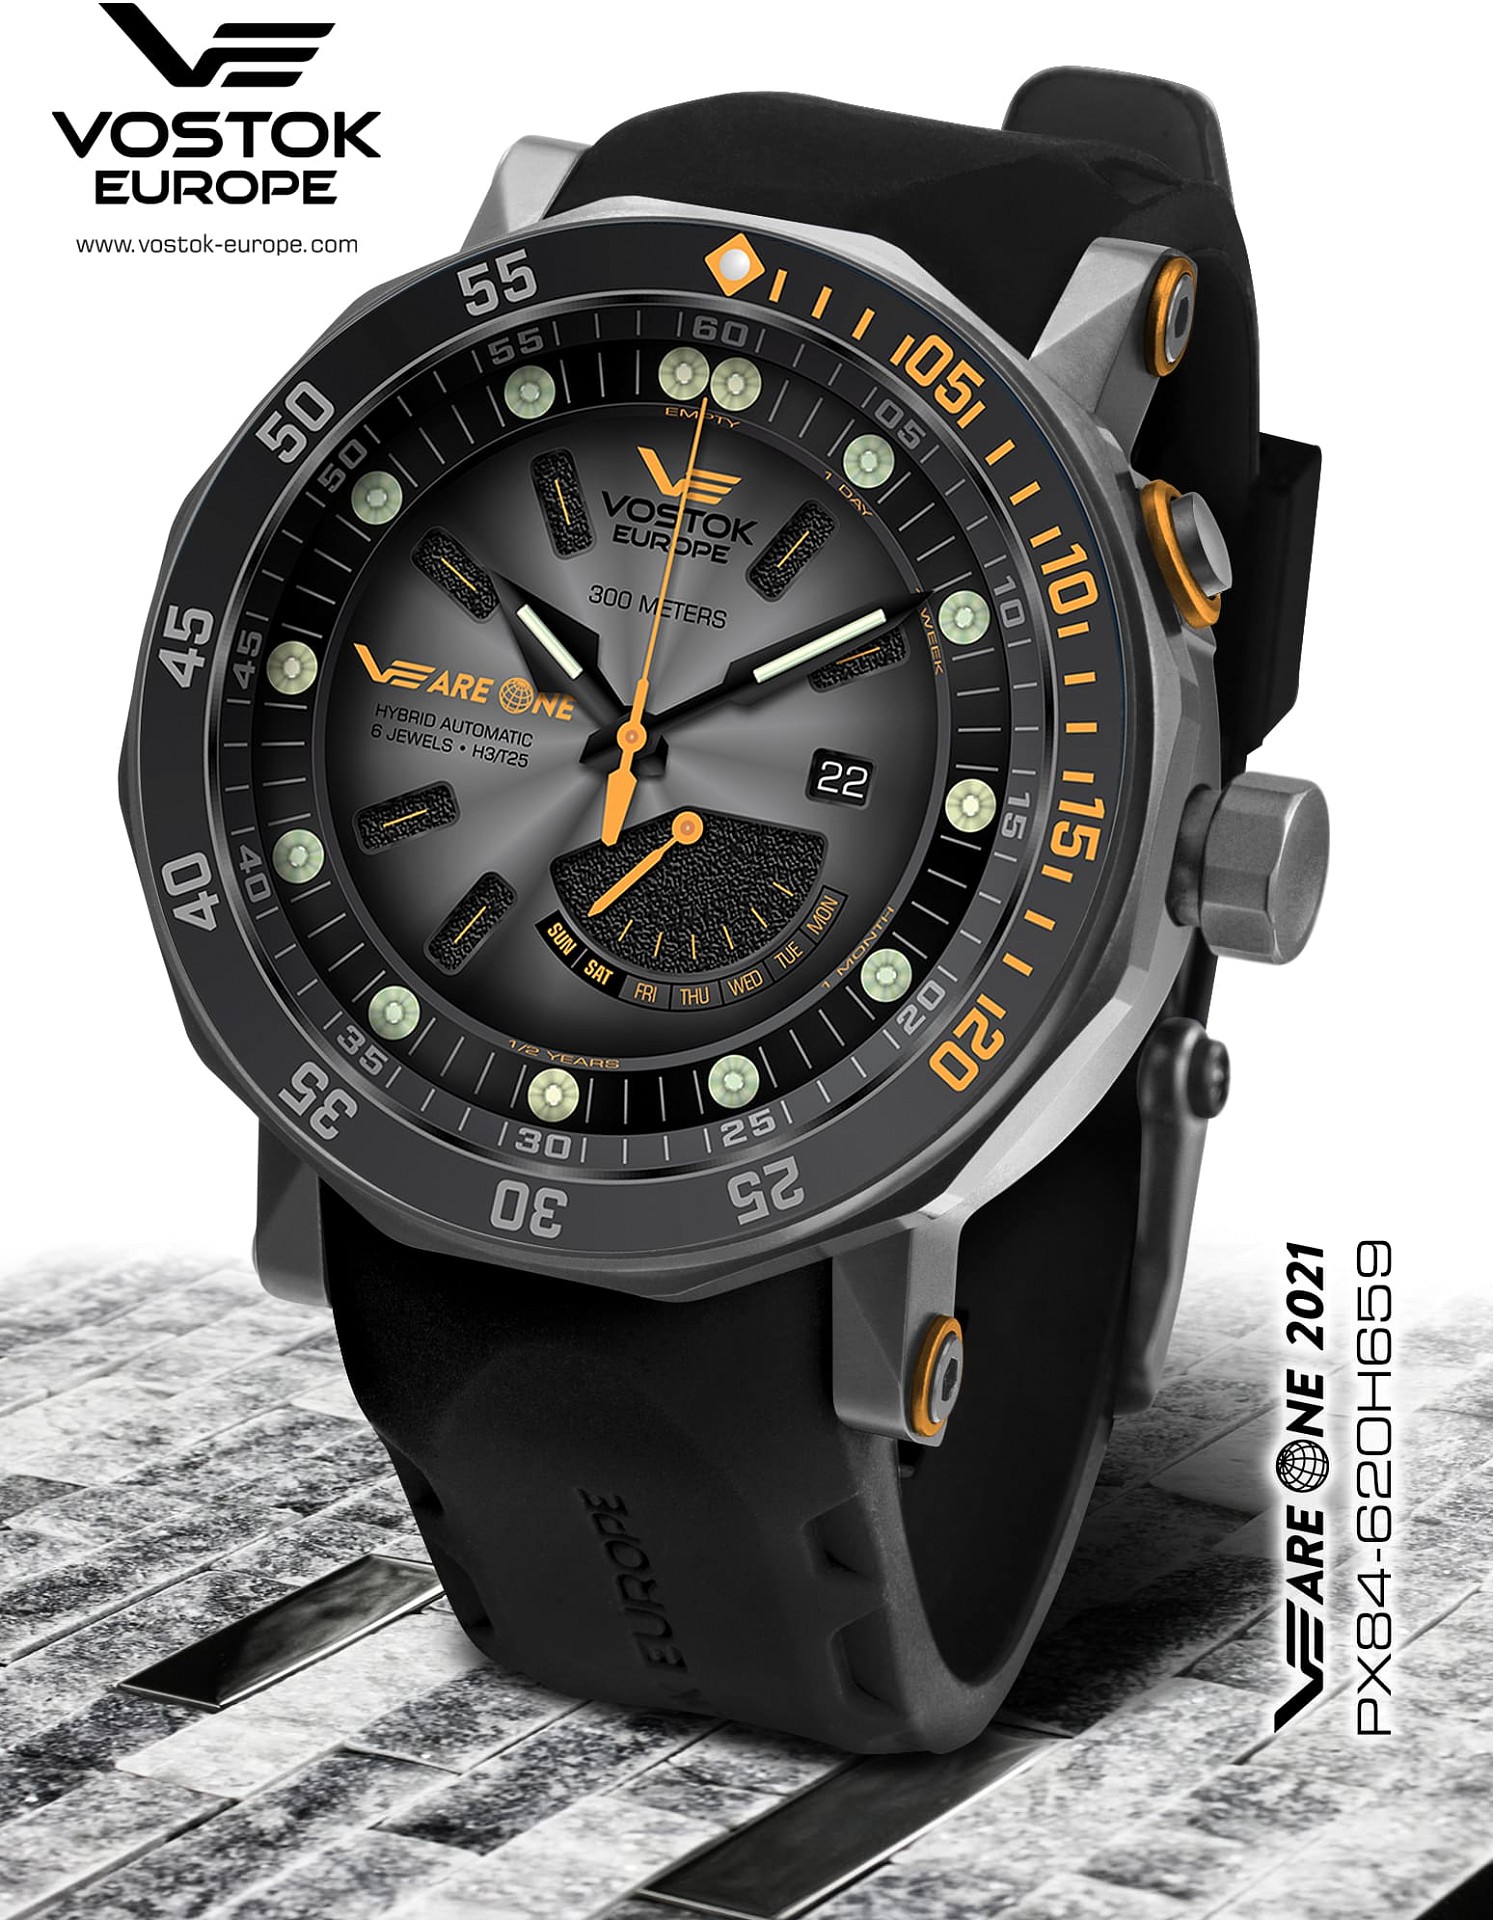  Vostok Europe VEareONE 2021 Special Editions PX84-620H658 + PX84-620H659 C+E Max 